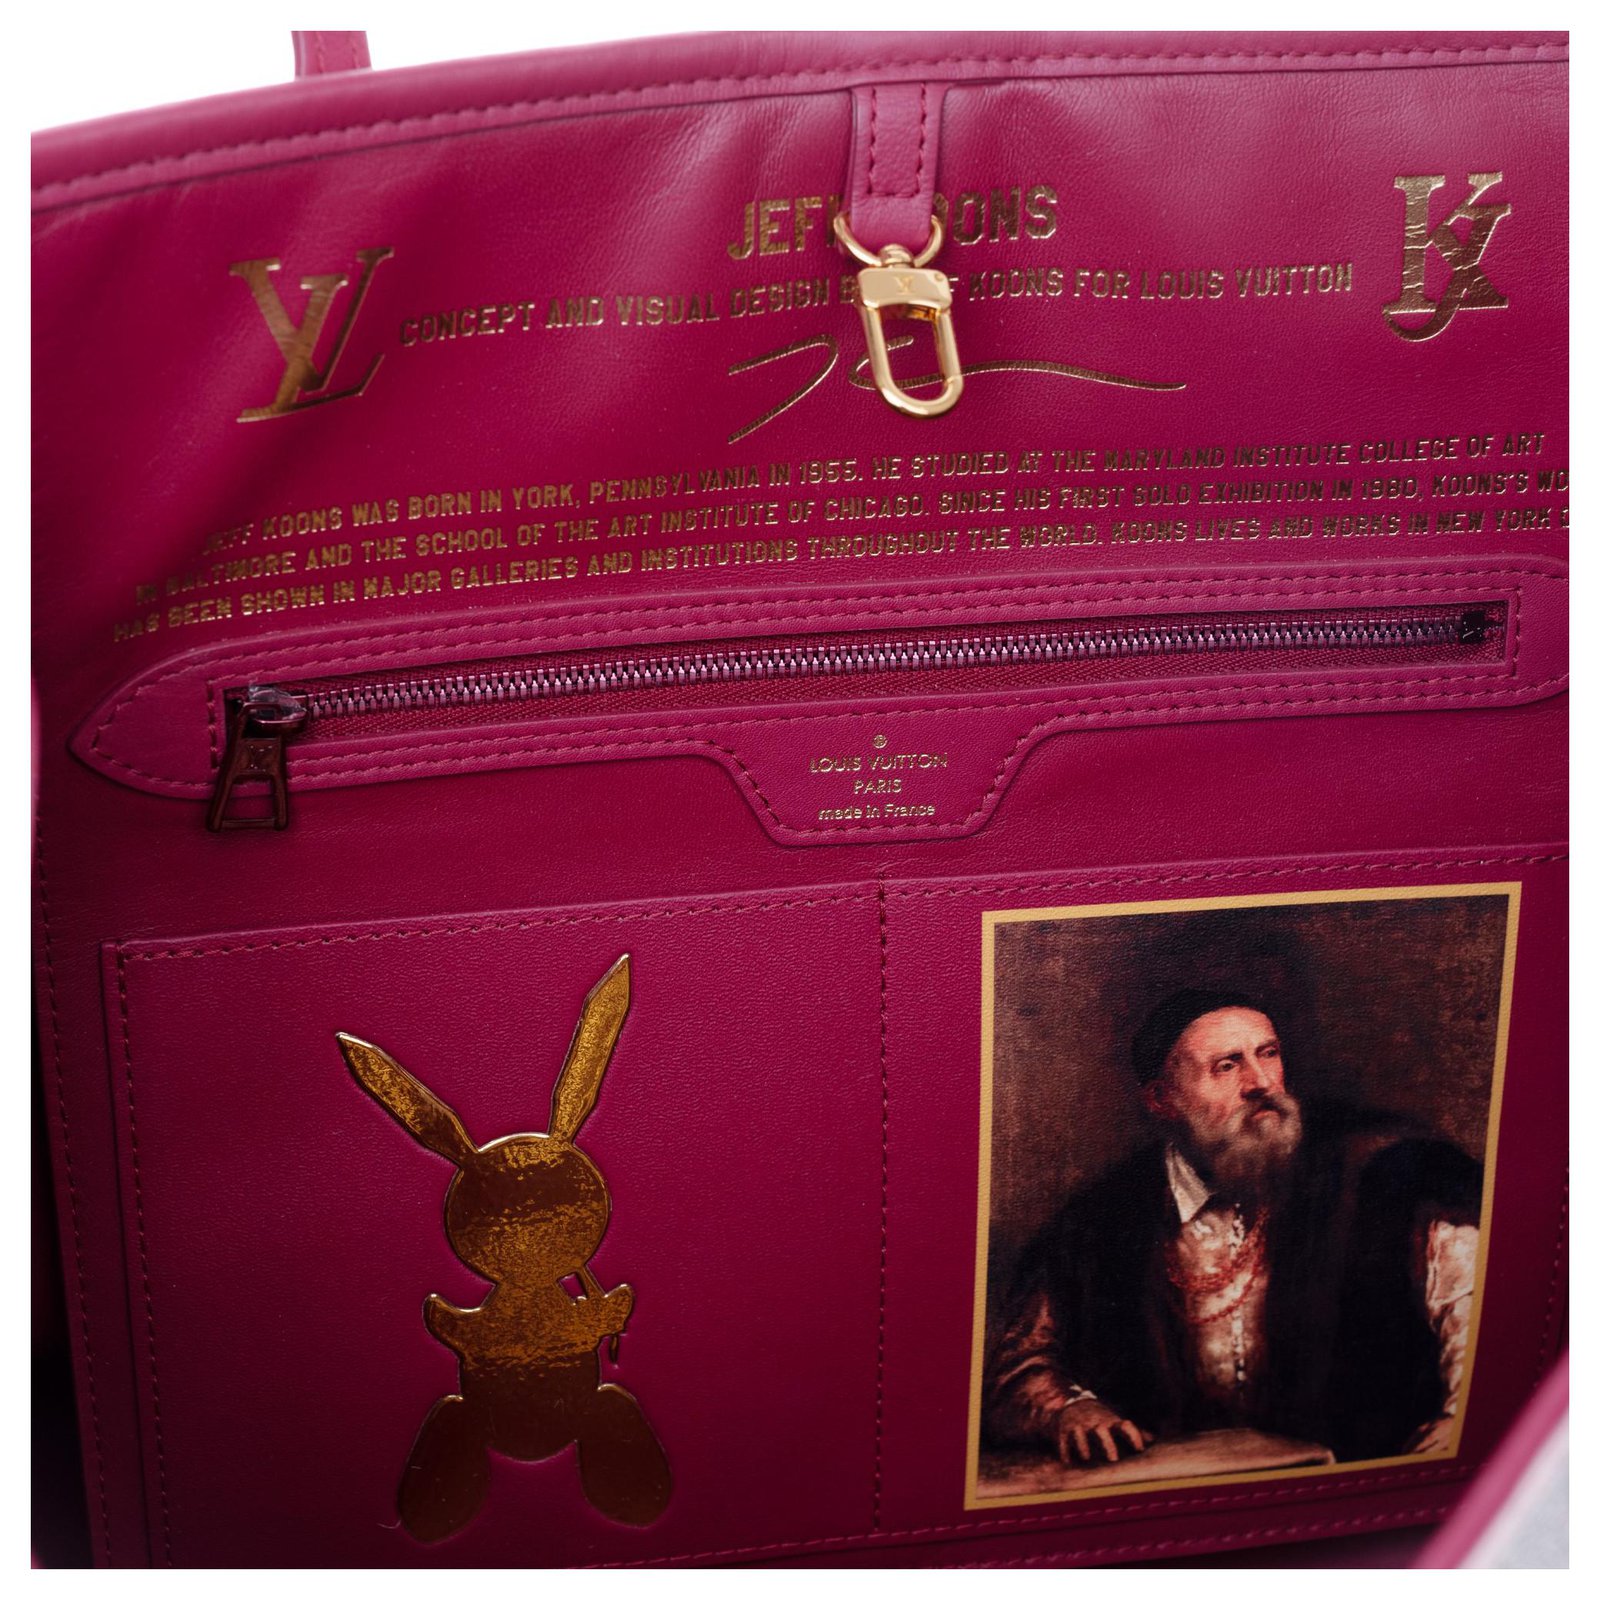 Louis Vuitton Neverfull NM Tote Limited Edition Jeff Koons Van